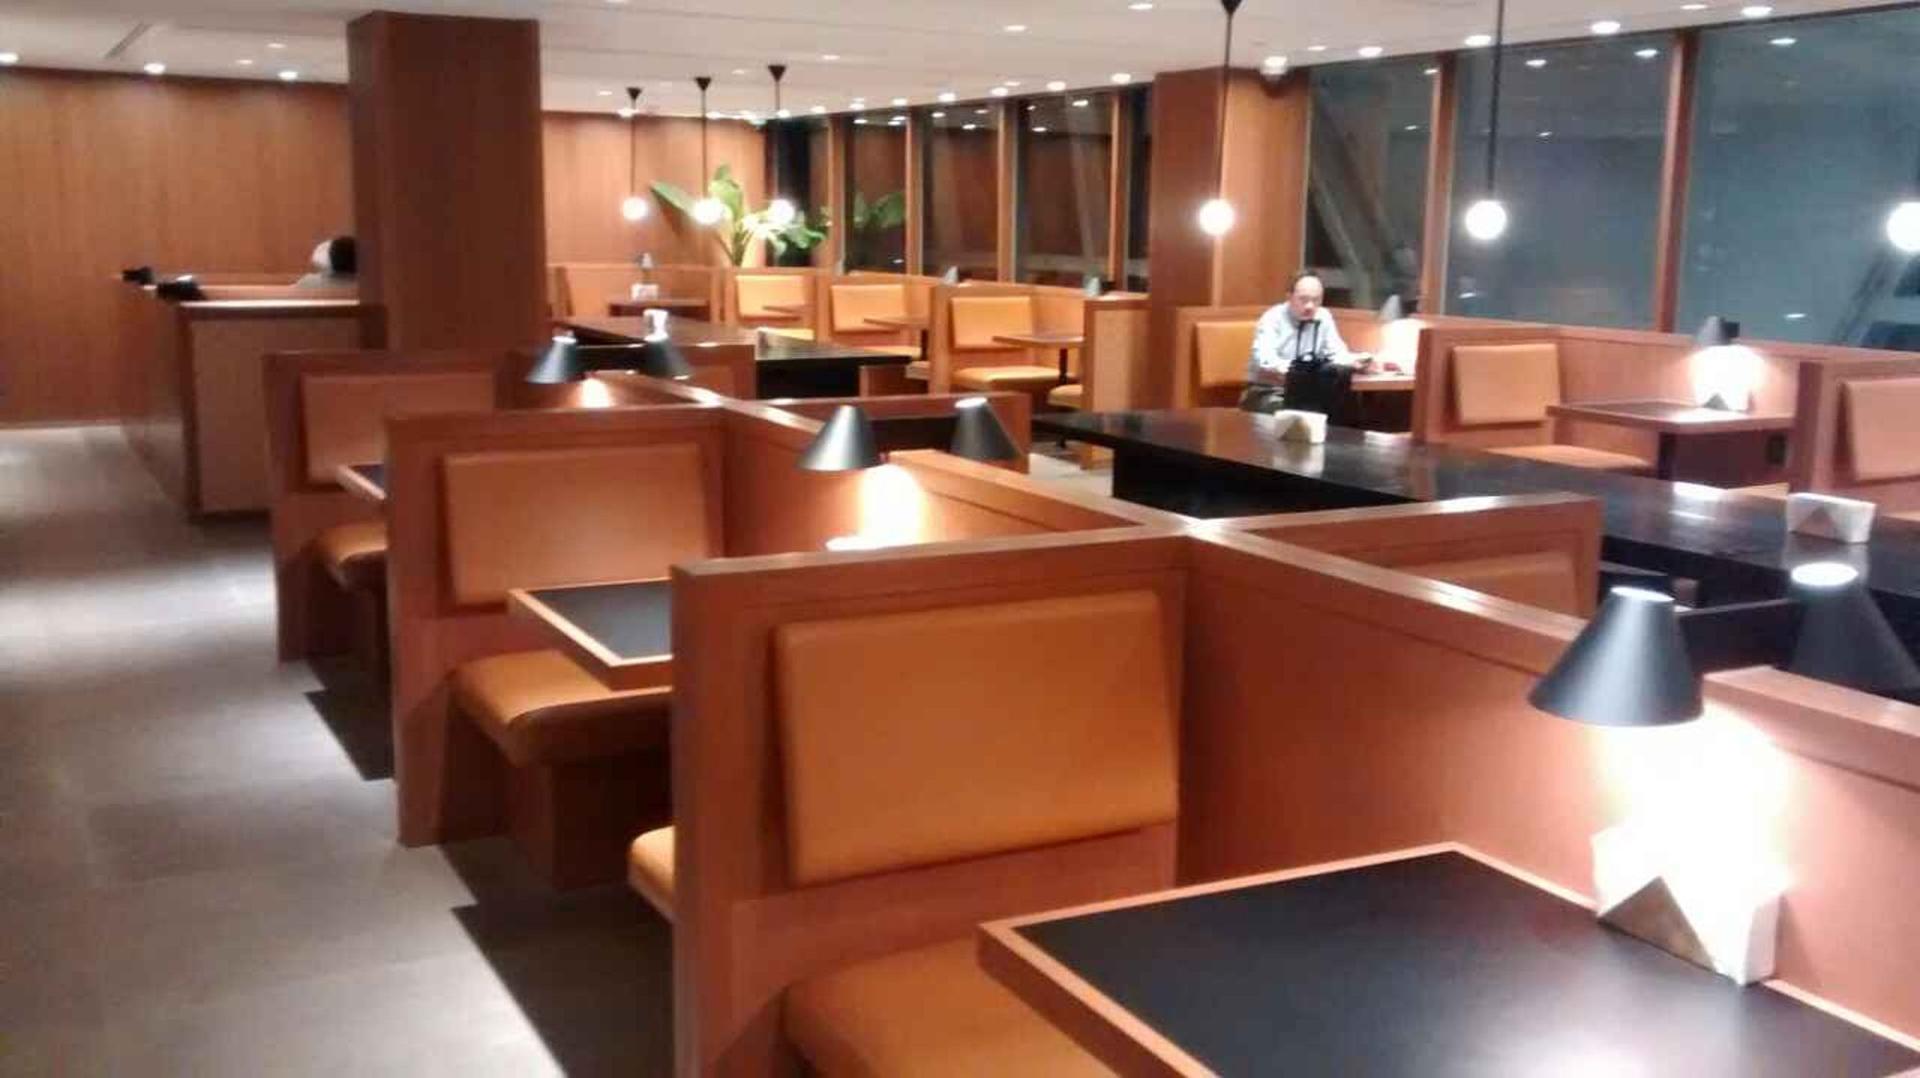 Cathay Pacific First and Business Class Lounge image 44 of 69